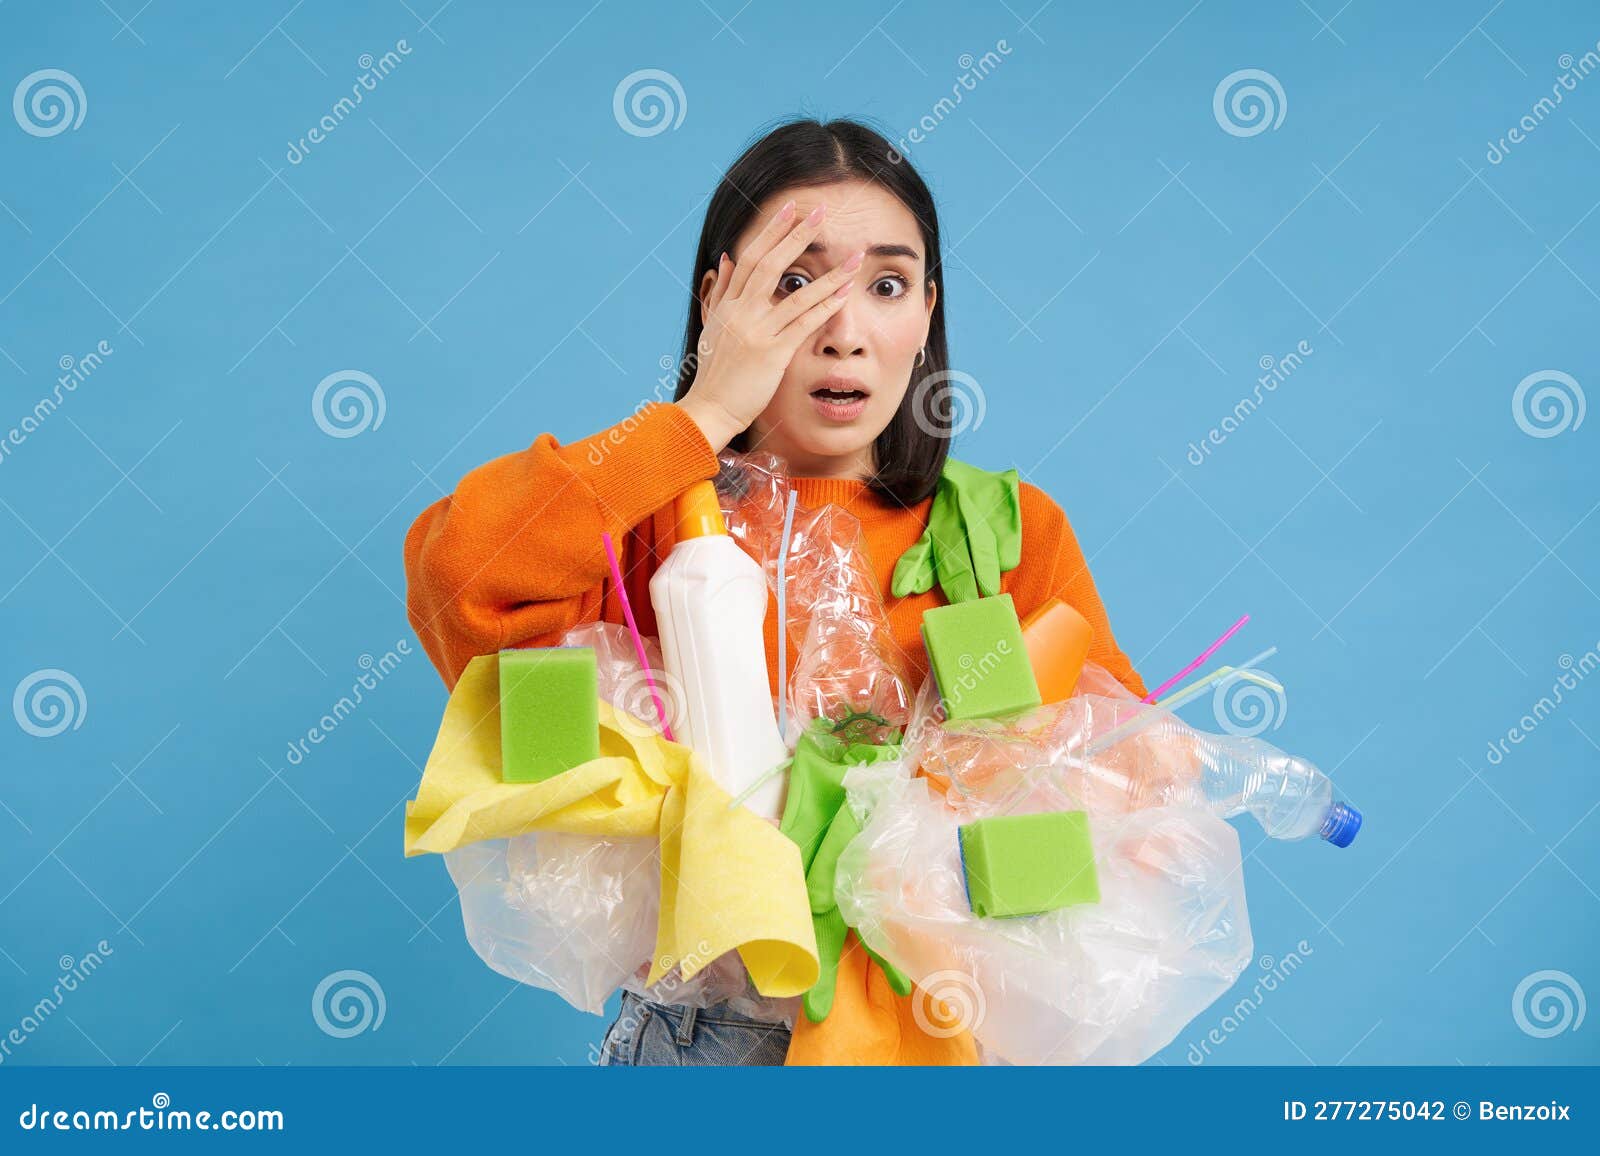 Shocked Asian Woman, Looks Embarrassed at Something Horrible, Holding ...